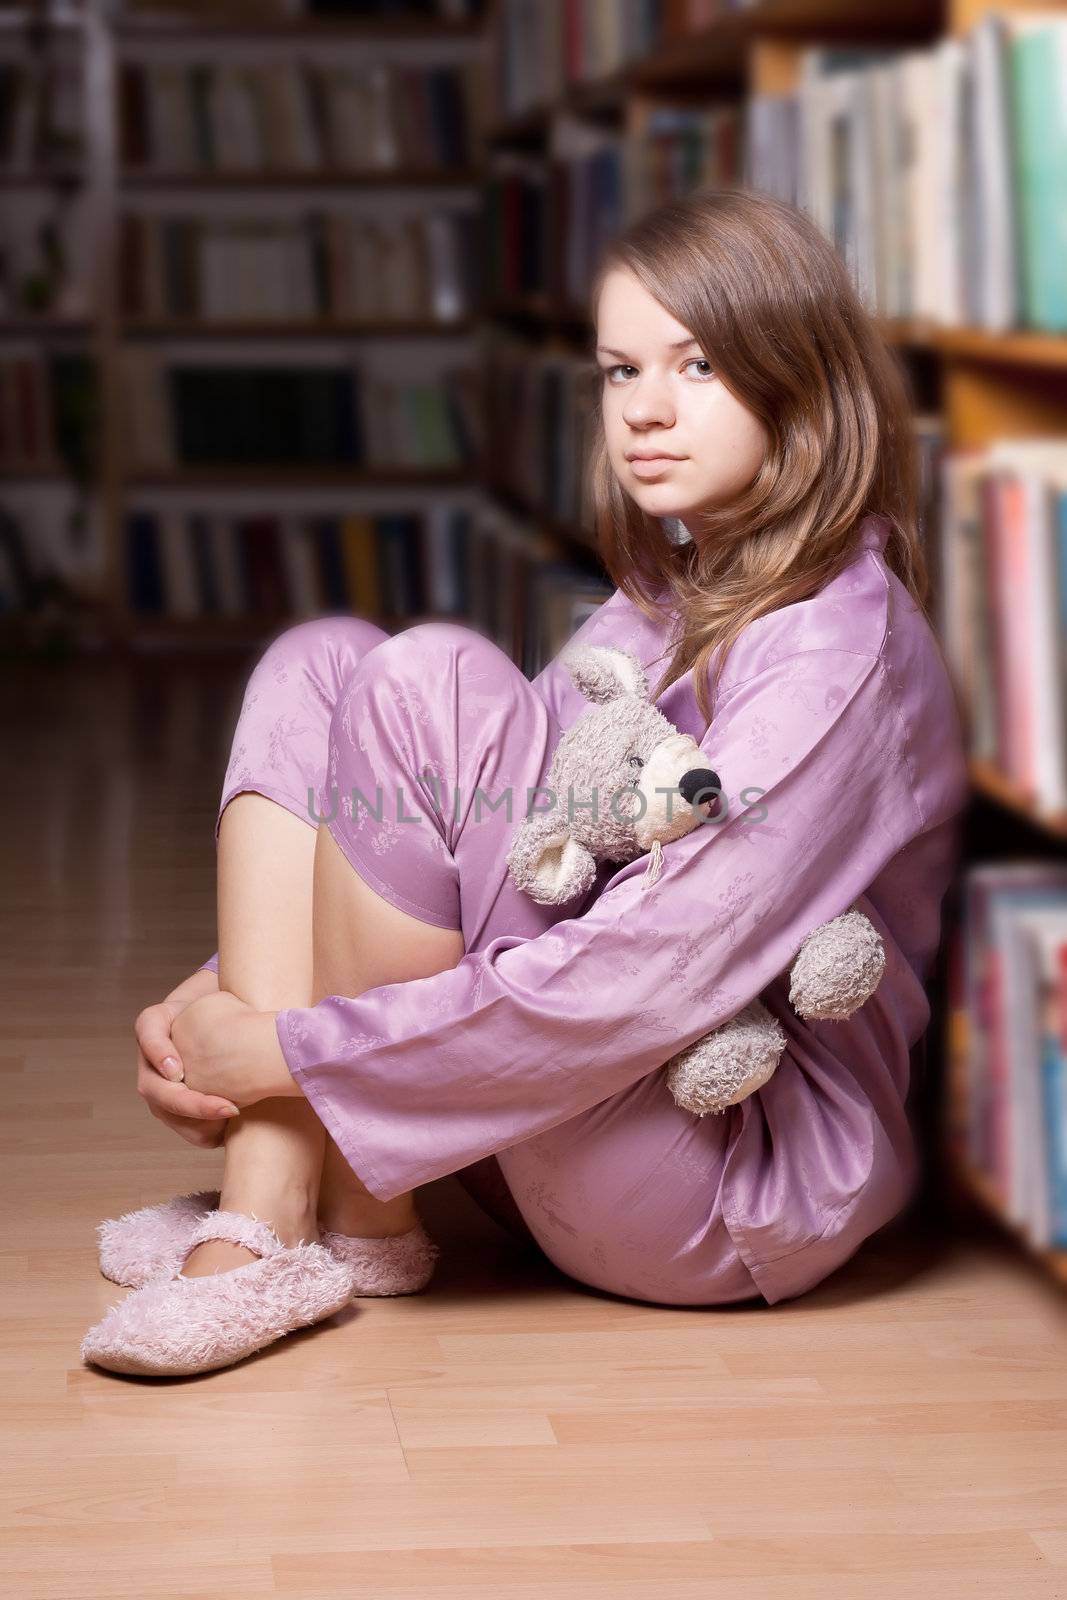 The girl in pink pajamas in the library by victosha